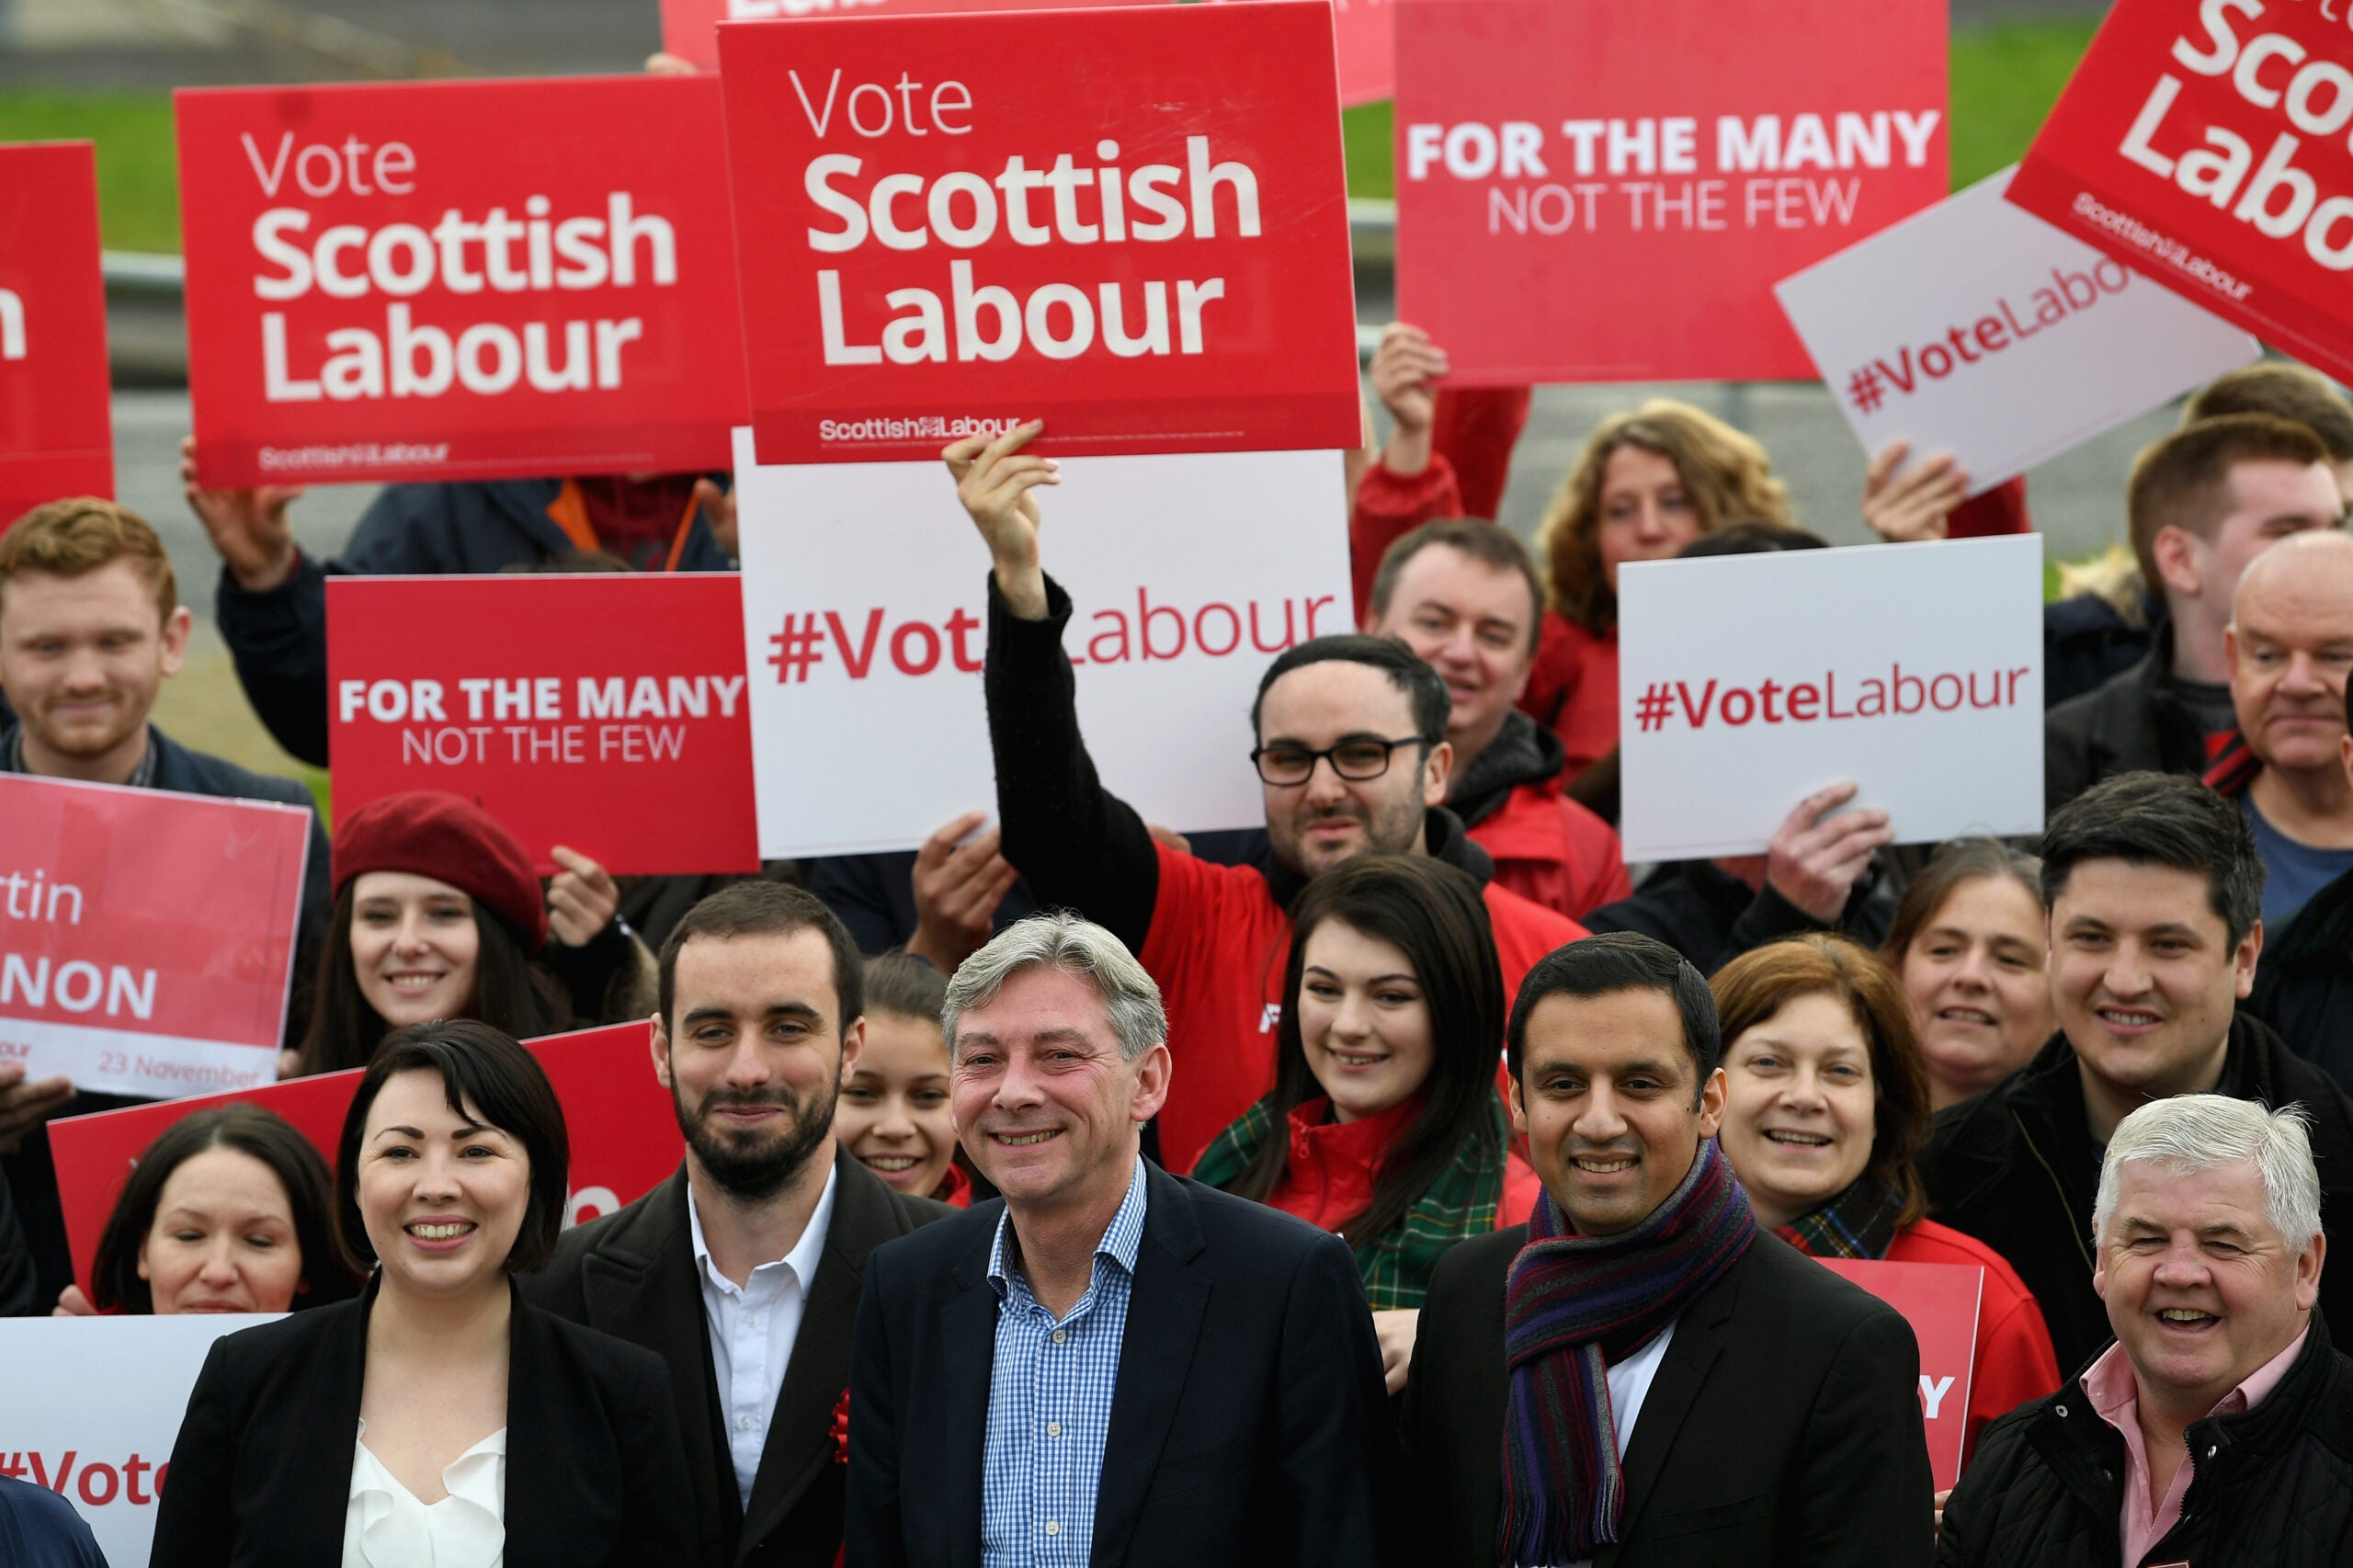 Scottish Labour risks irrelevance if it doesn’t listen to voters